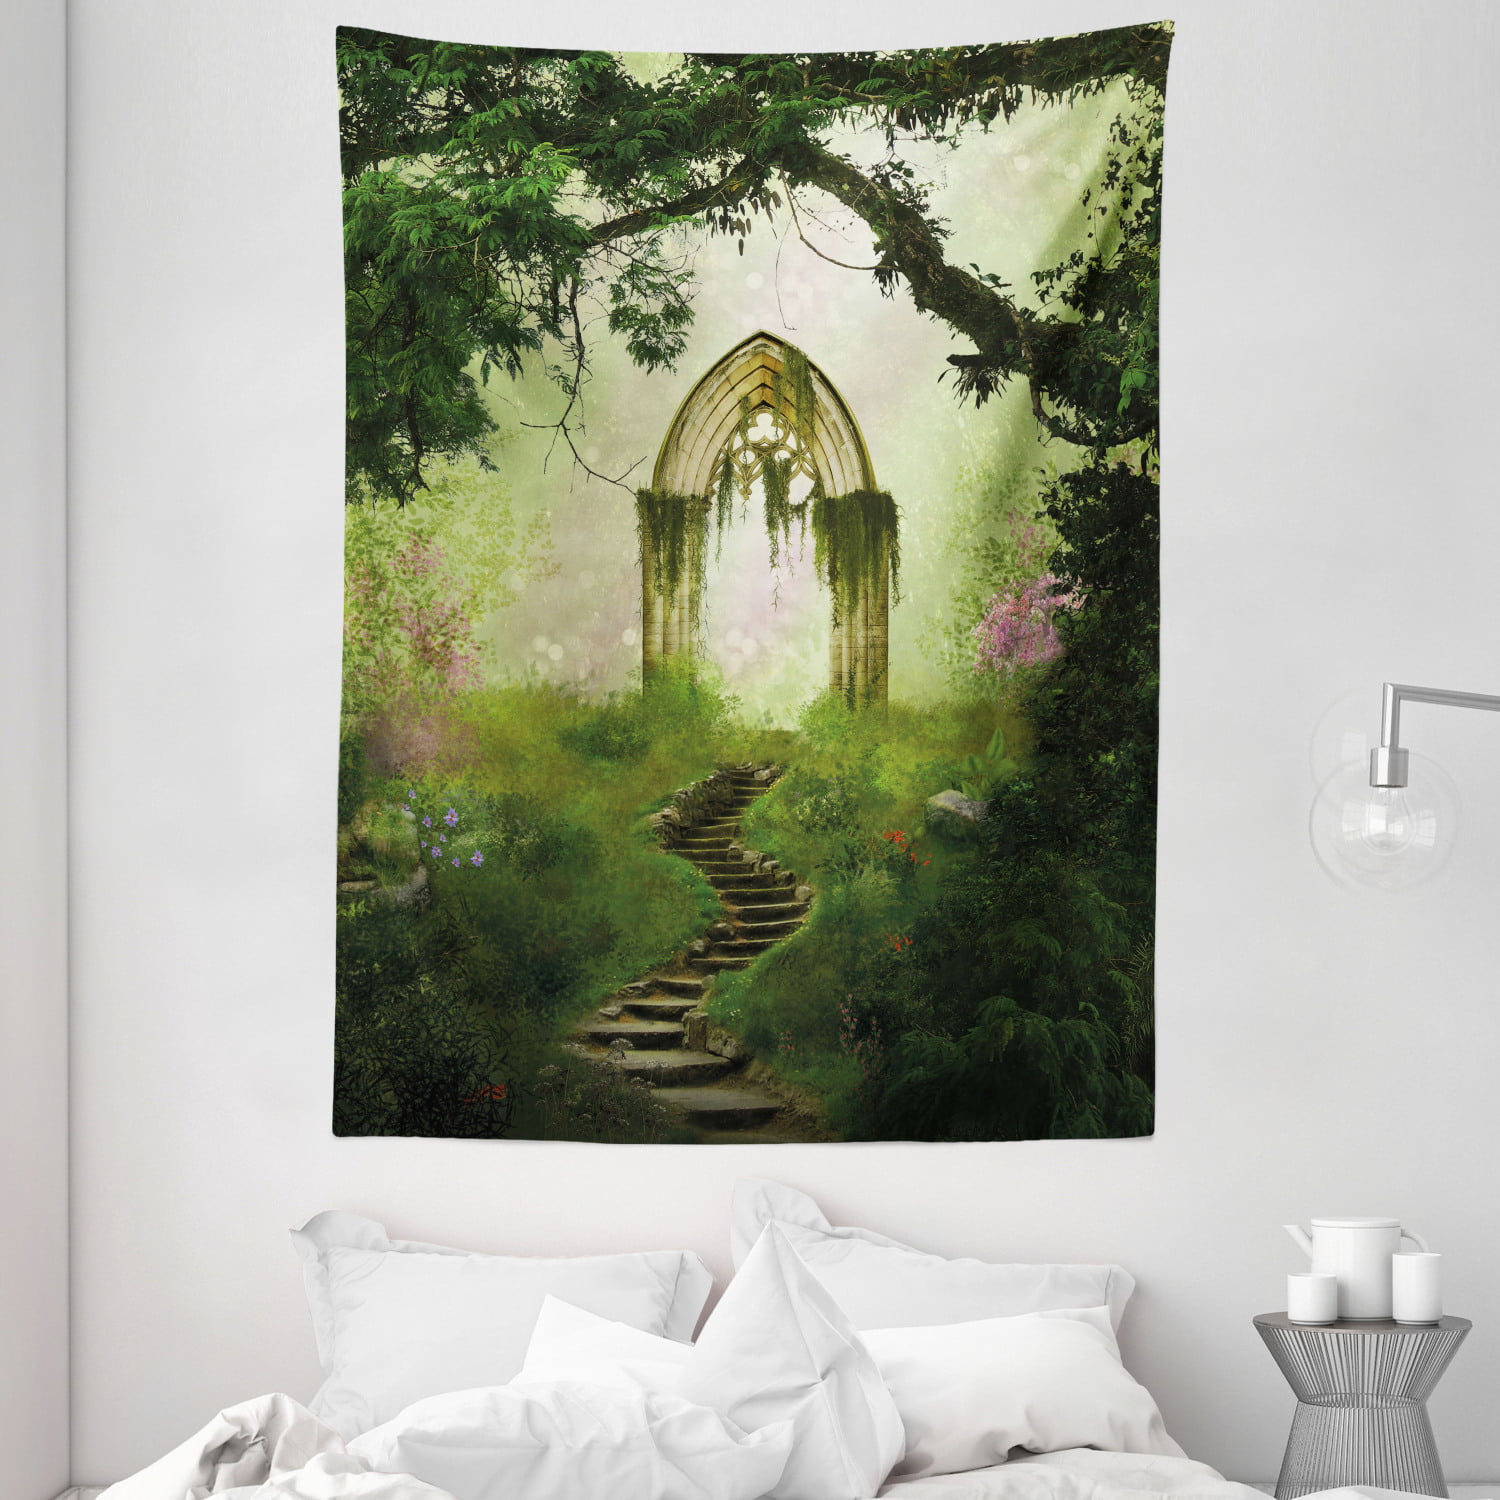 Fantasy Forest Art Tapestry Wall Hanging Path Way Through Dense Tapestry Decor 